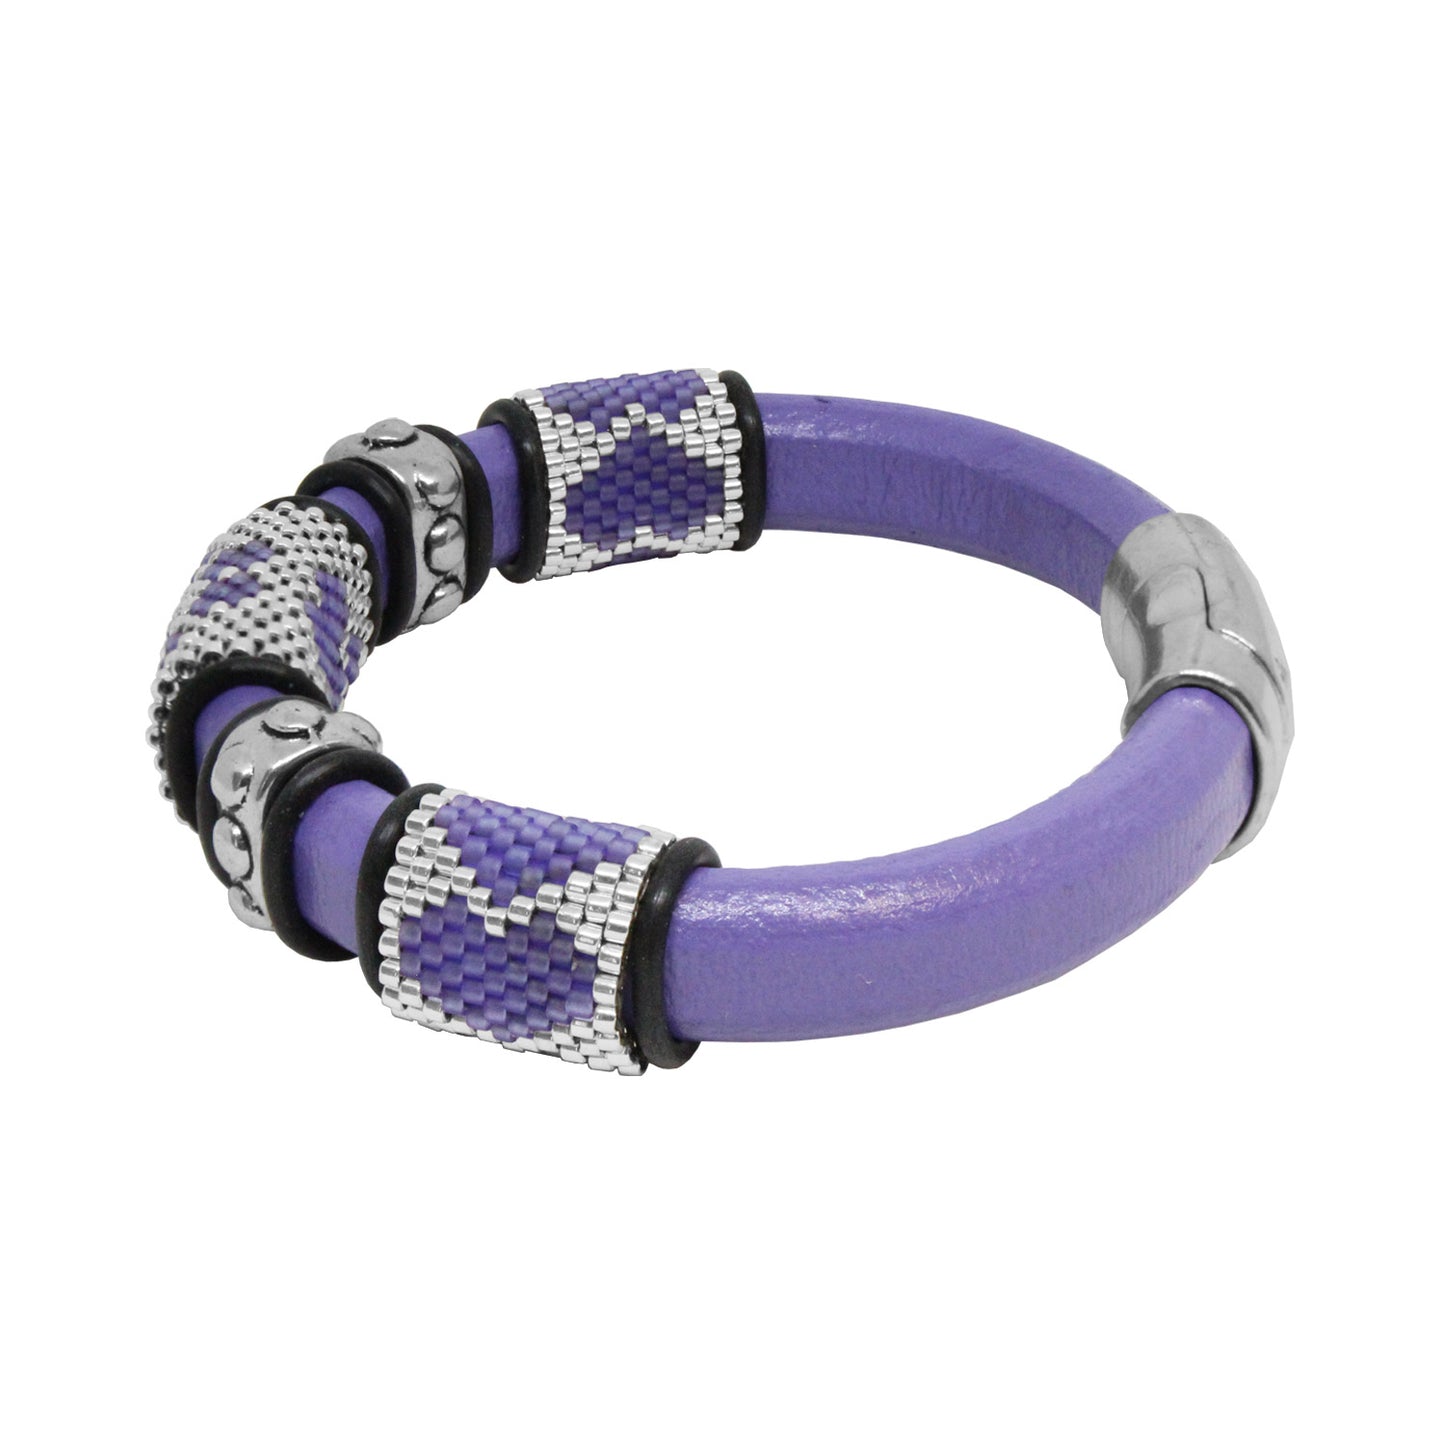 LILAC PURPLE Dog Paw Bracelet / fits 6.5 to 7 Inch wrist size / leather with magnetic clasp